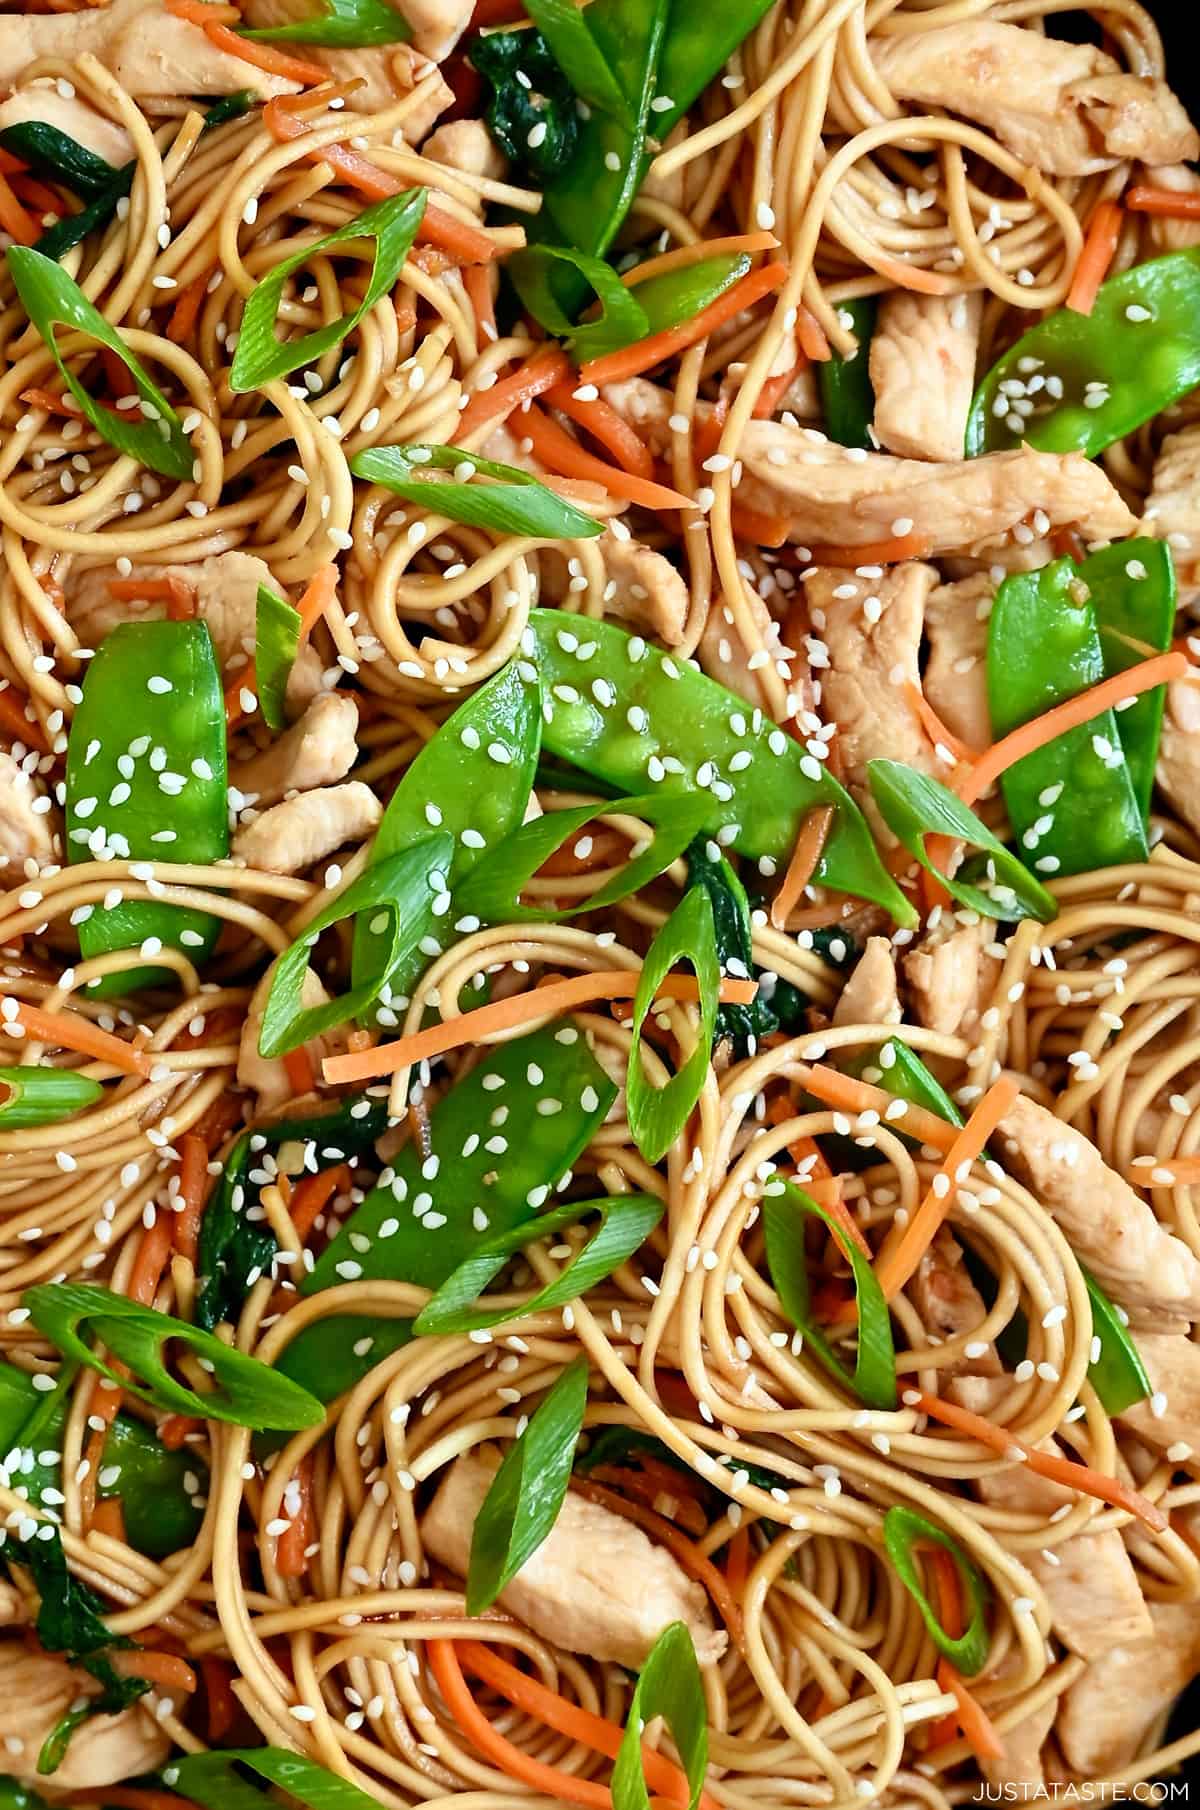 Stir-fried lo mein noodles, snow peas, shredded carrots and chicken garnished with sesame seeds.